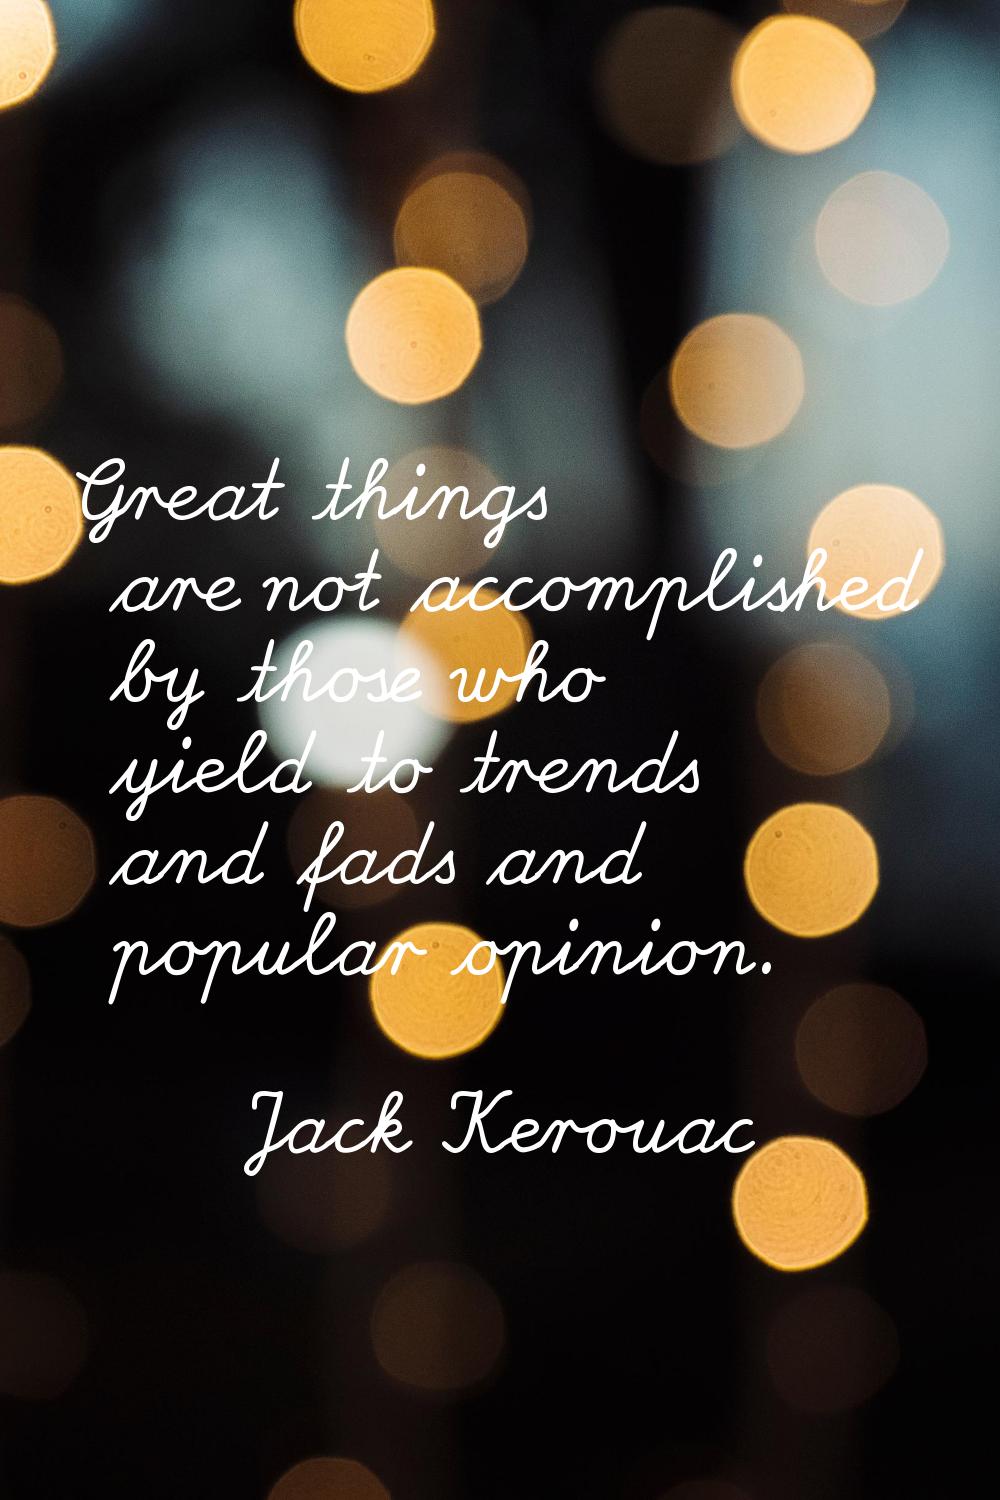 Great things are not accomplished by those who yield to trends and fads and popular opinion.